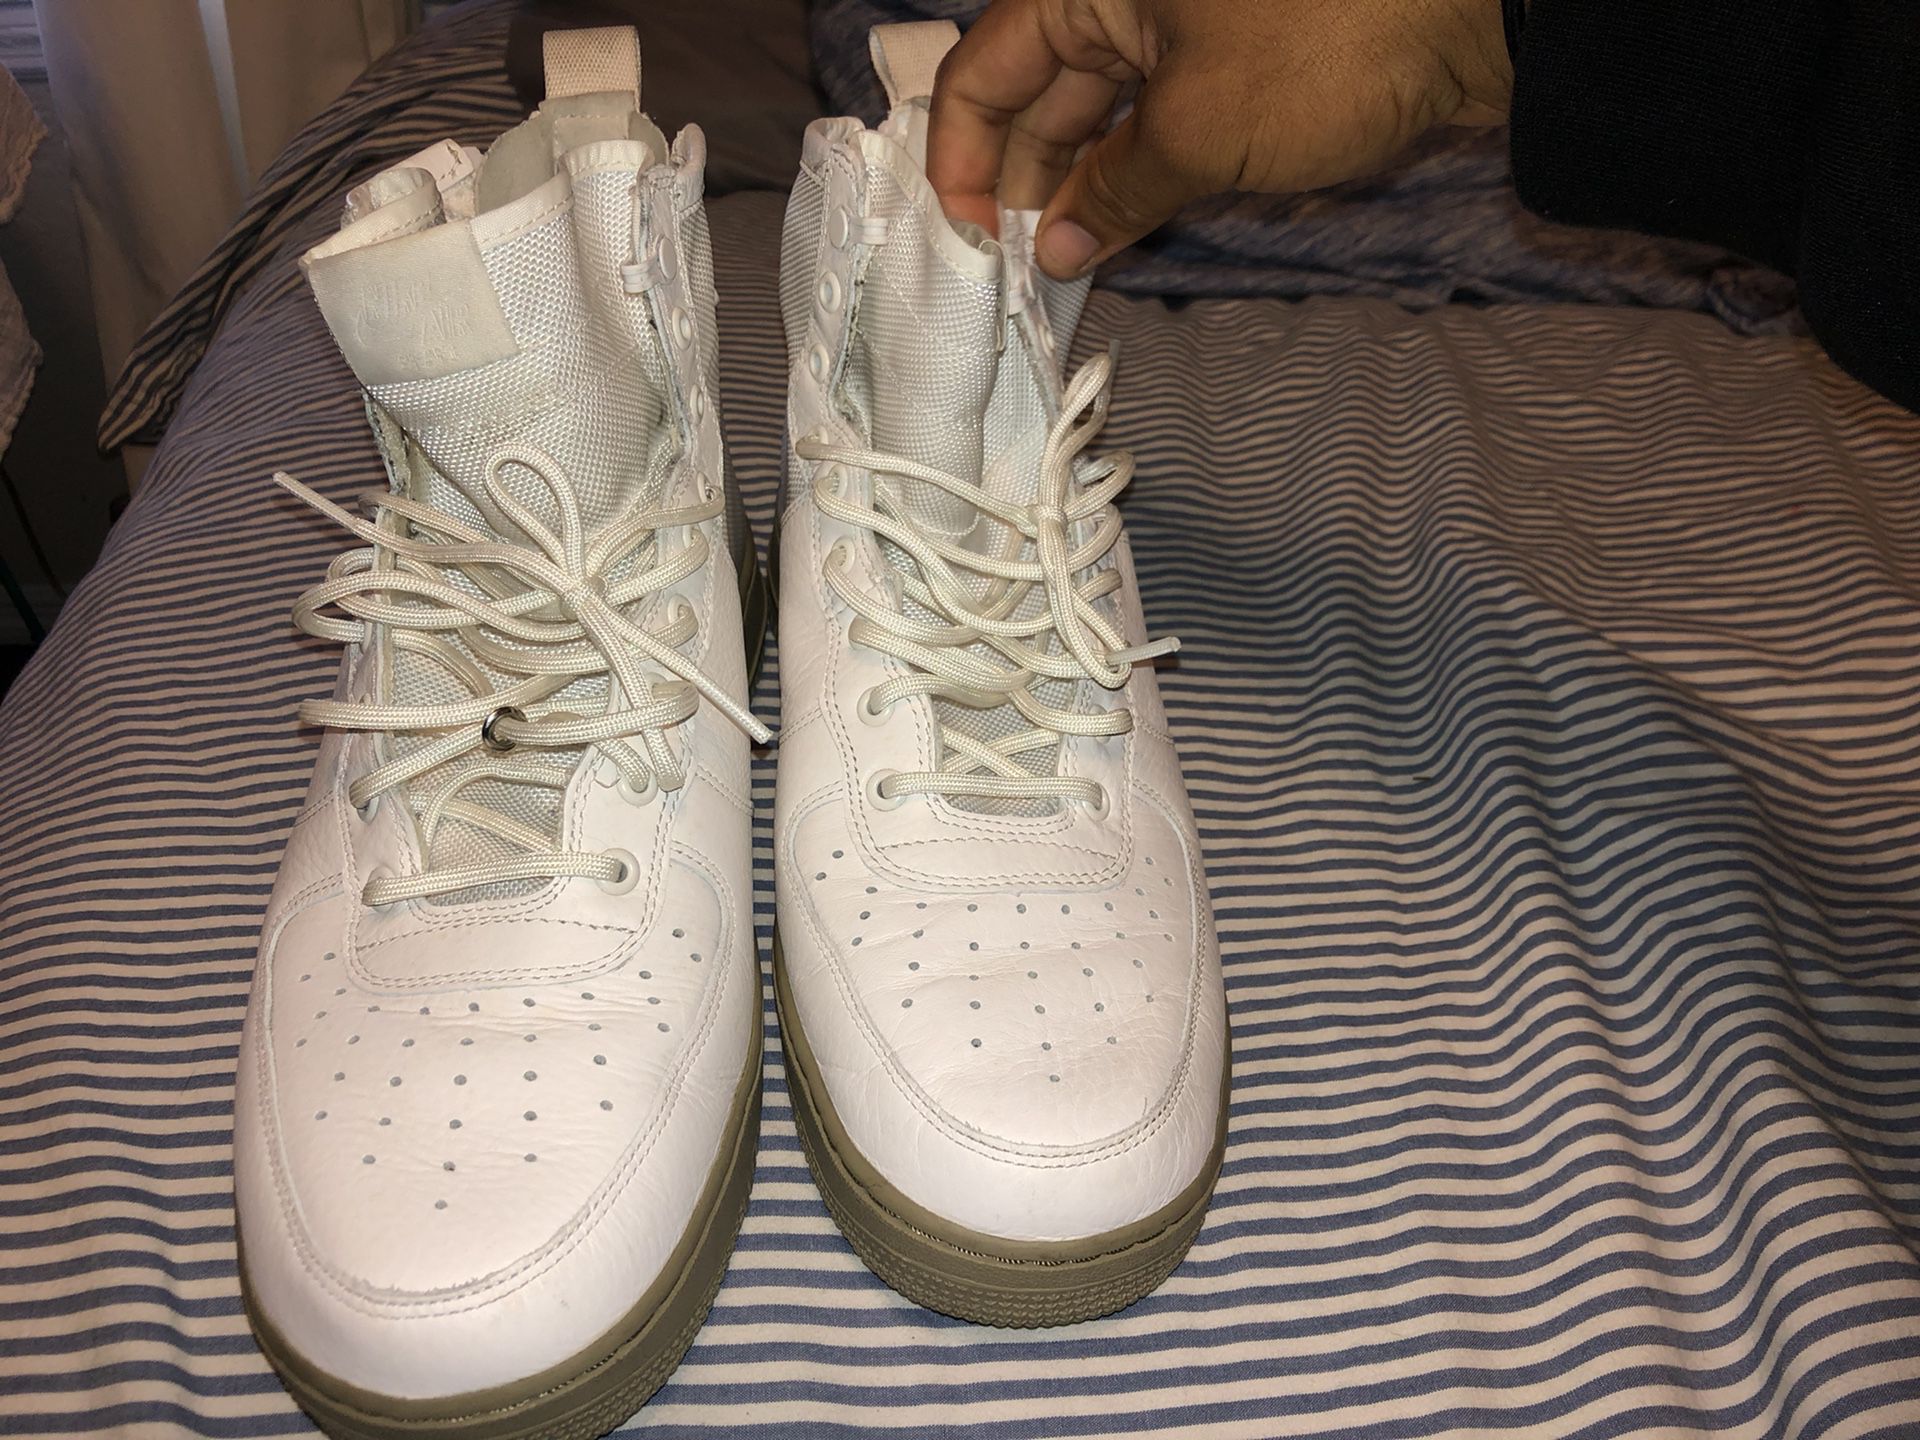 White Air Force 1 mids